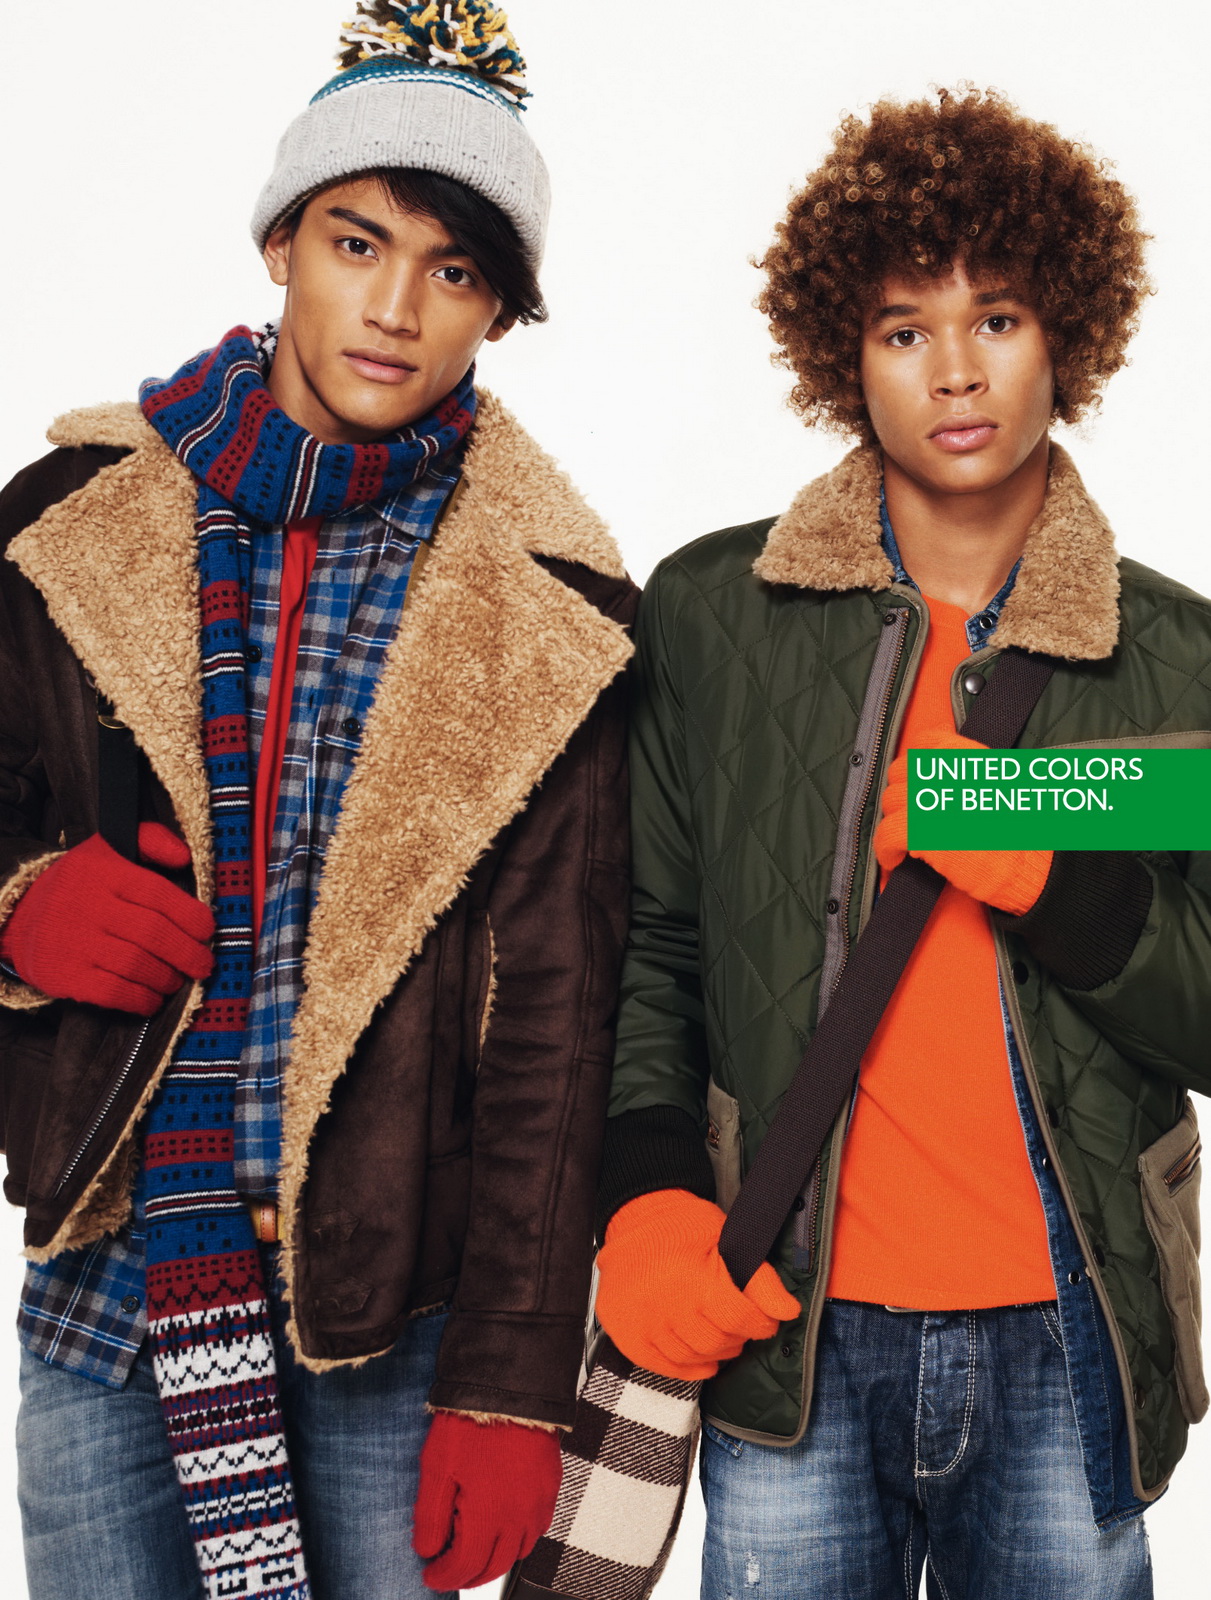 United Colors of Benetton 2011秋冬广告 